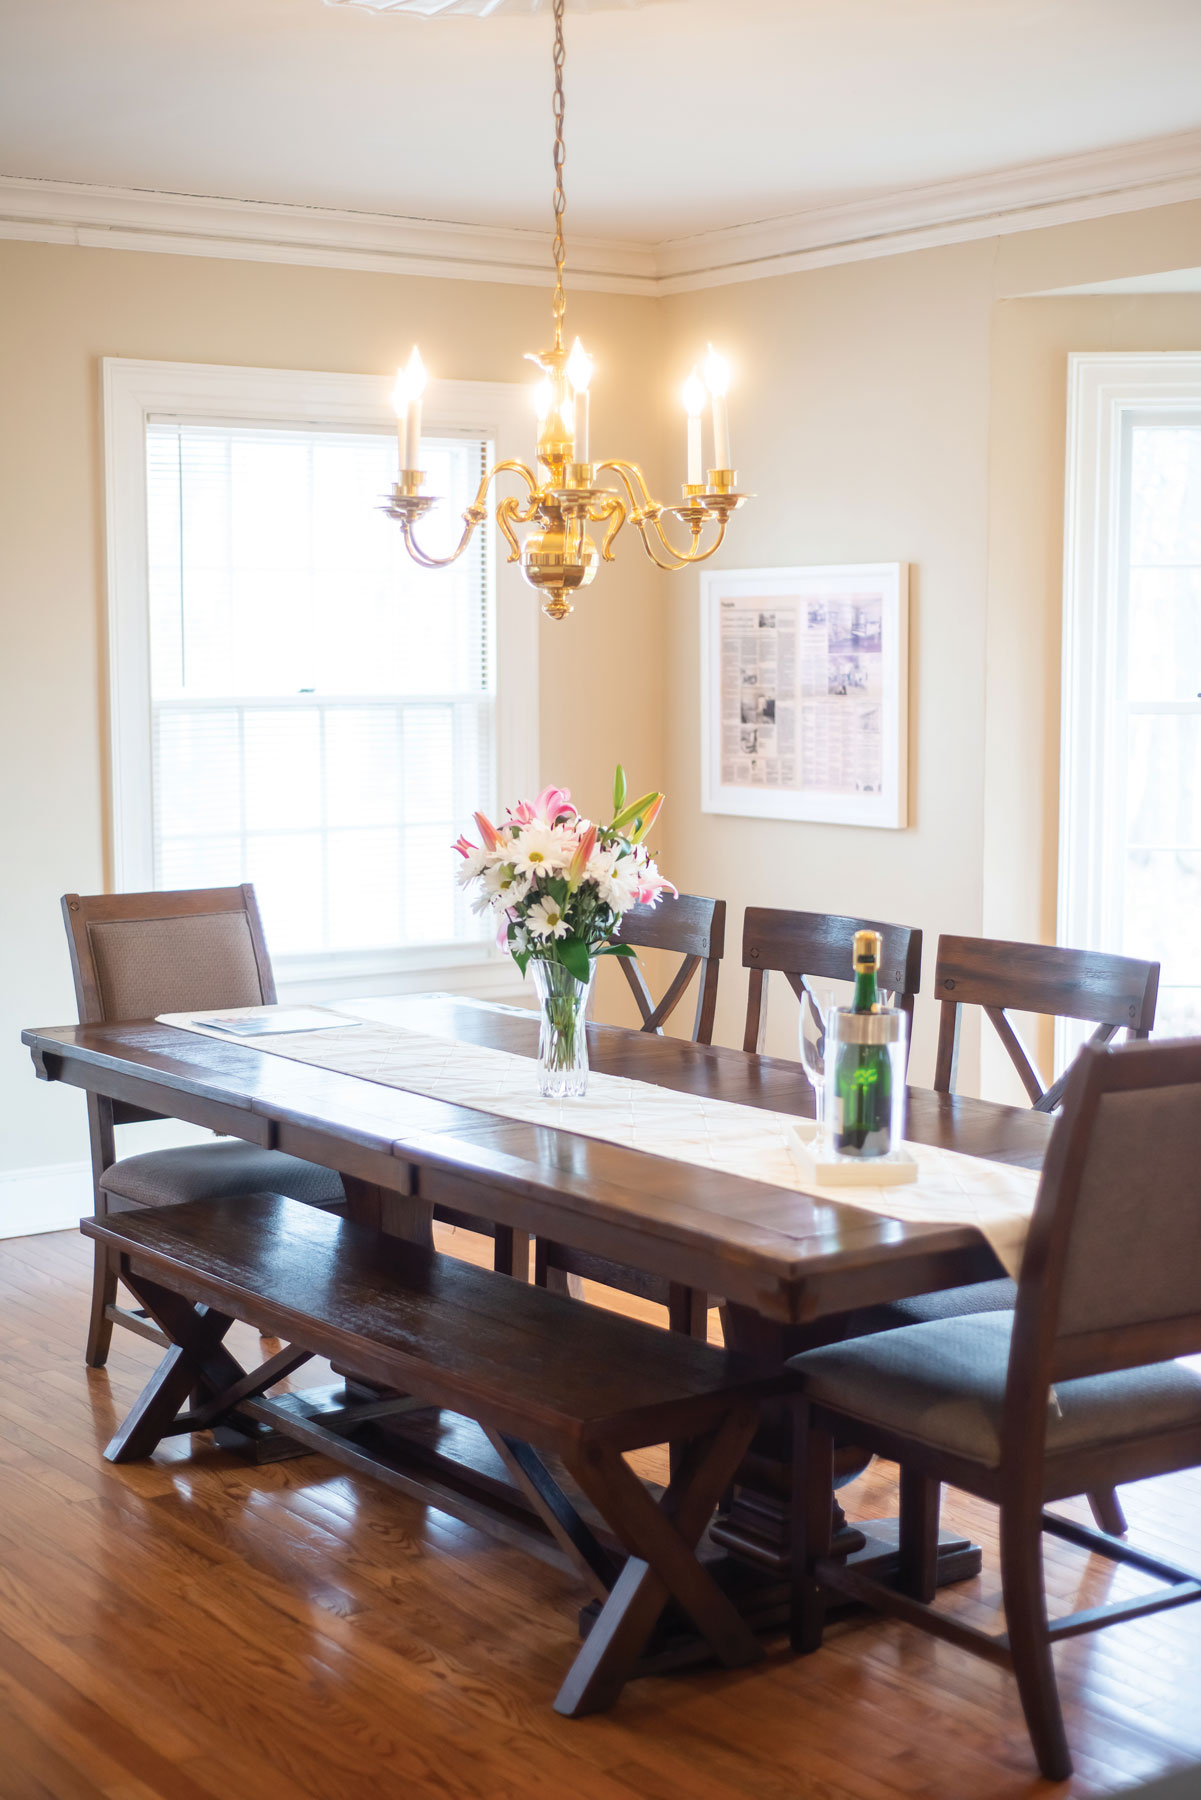 Homes Dining Table